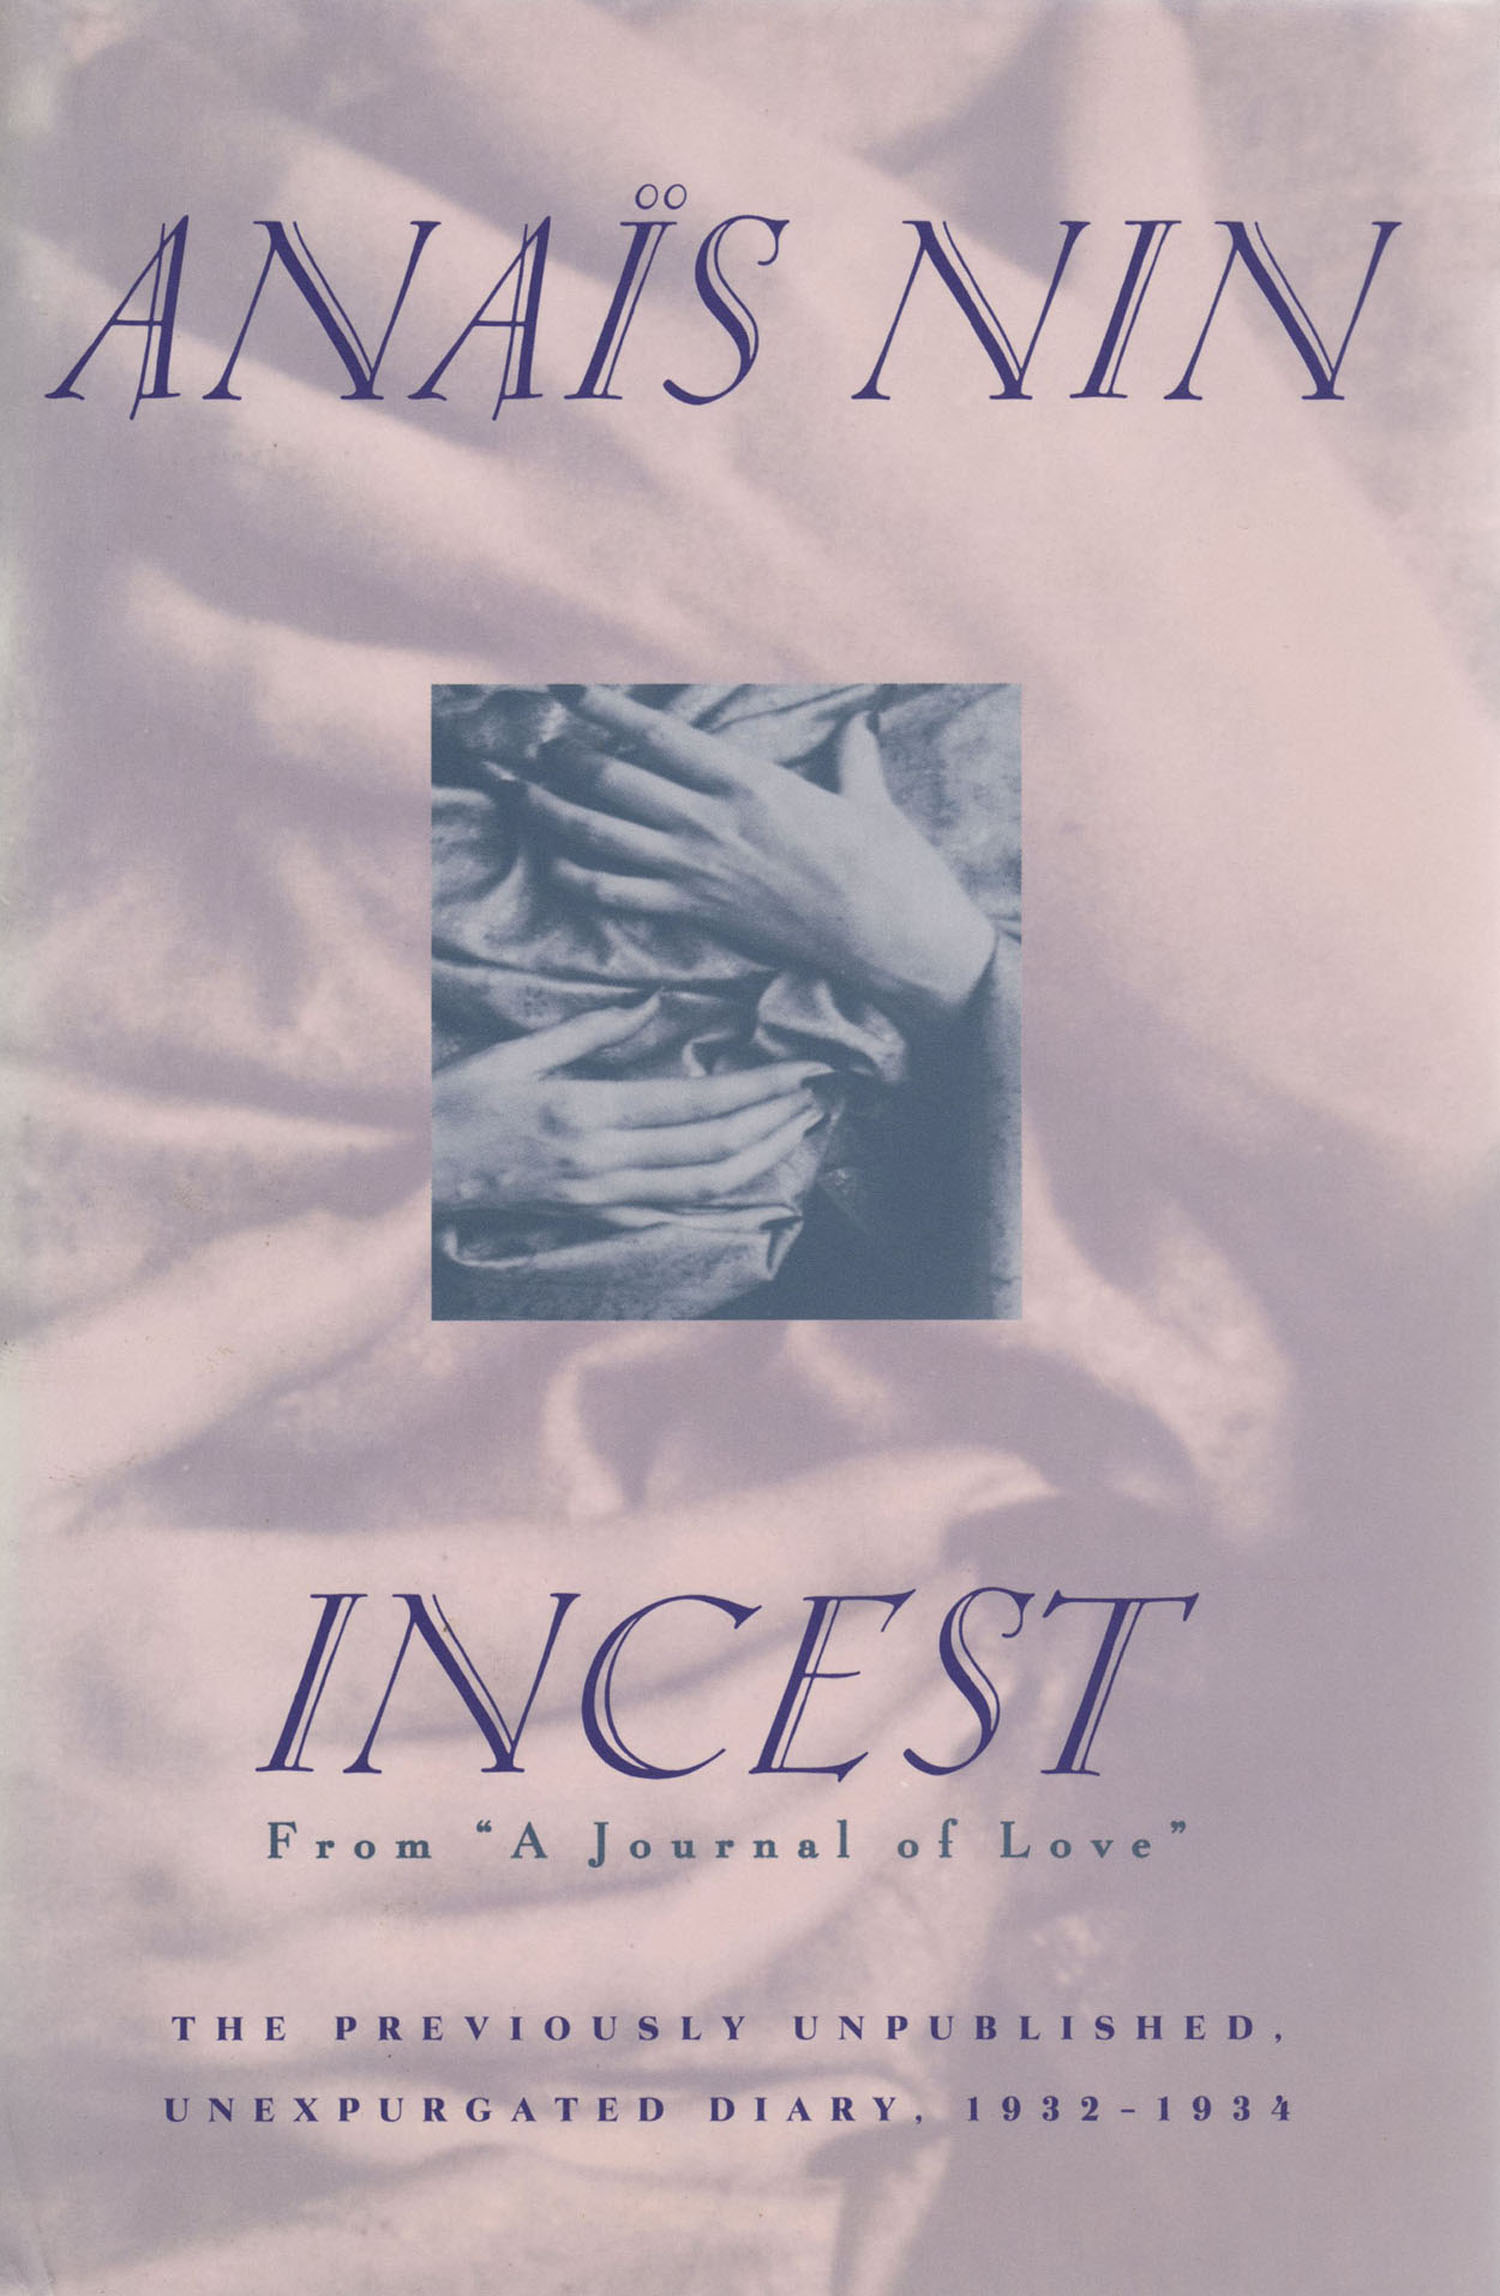 Incest: The Unexpurgated Diary of Anais Nin 1932-1934